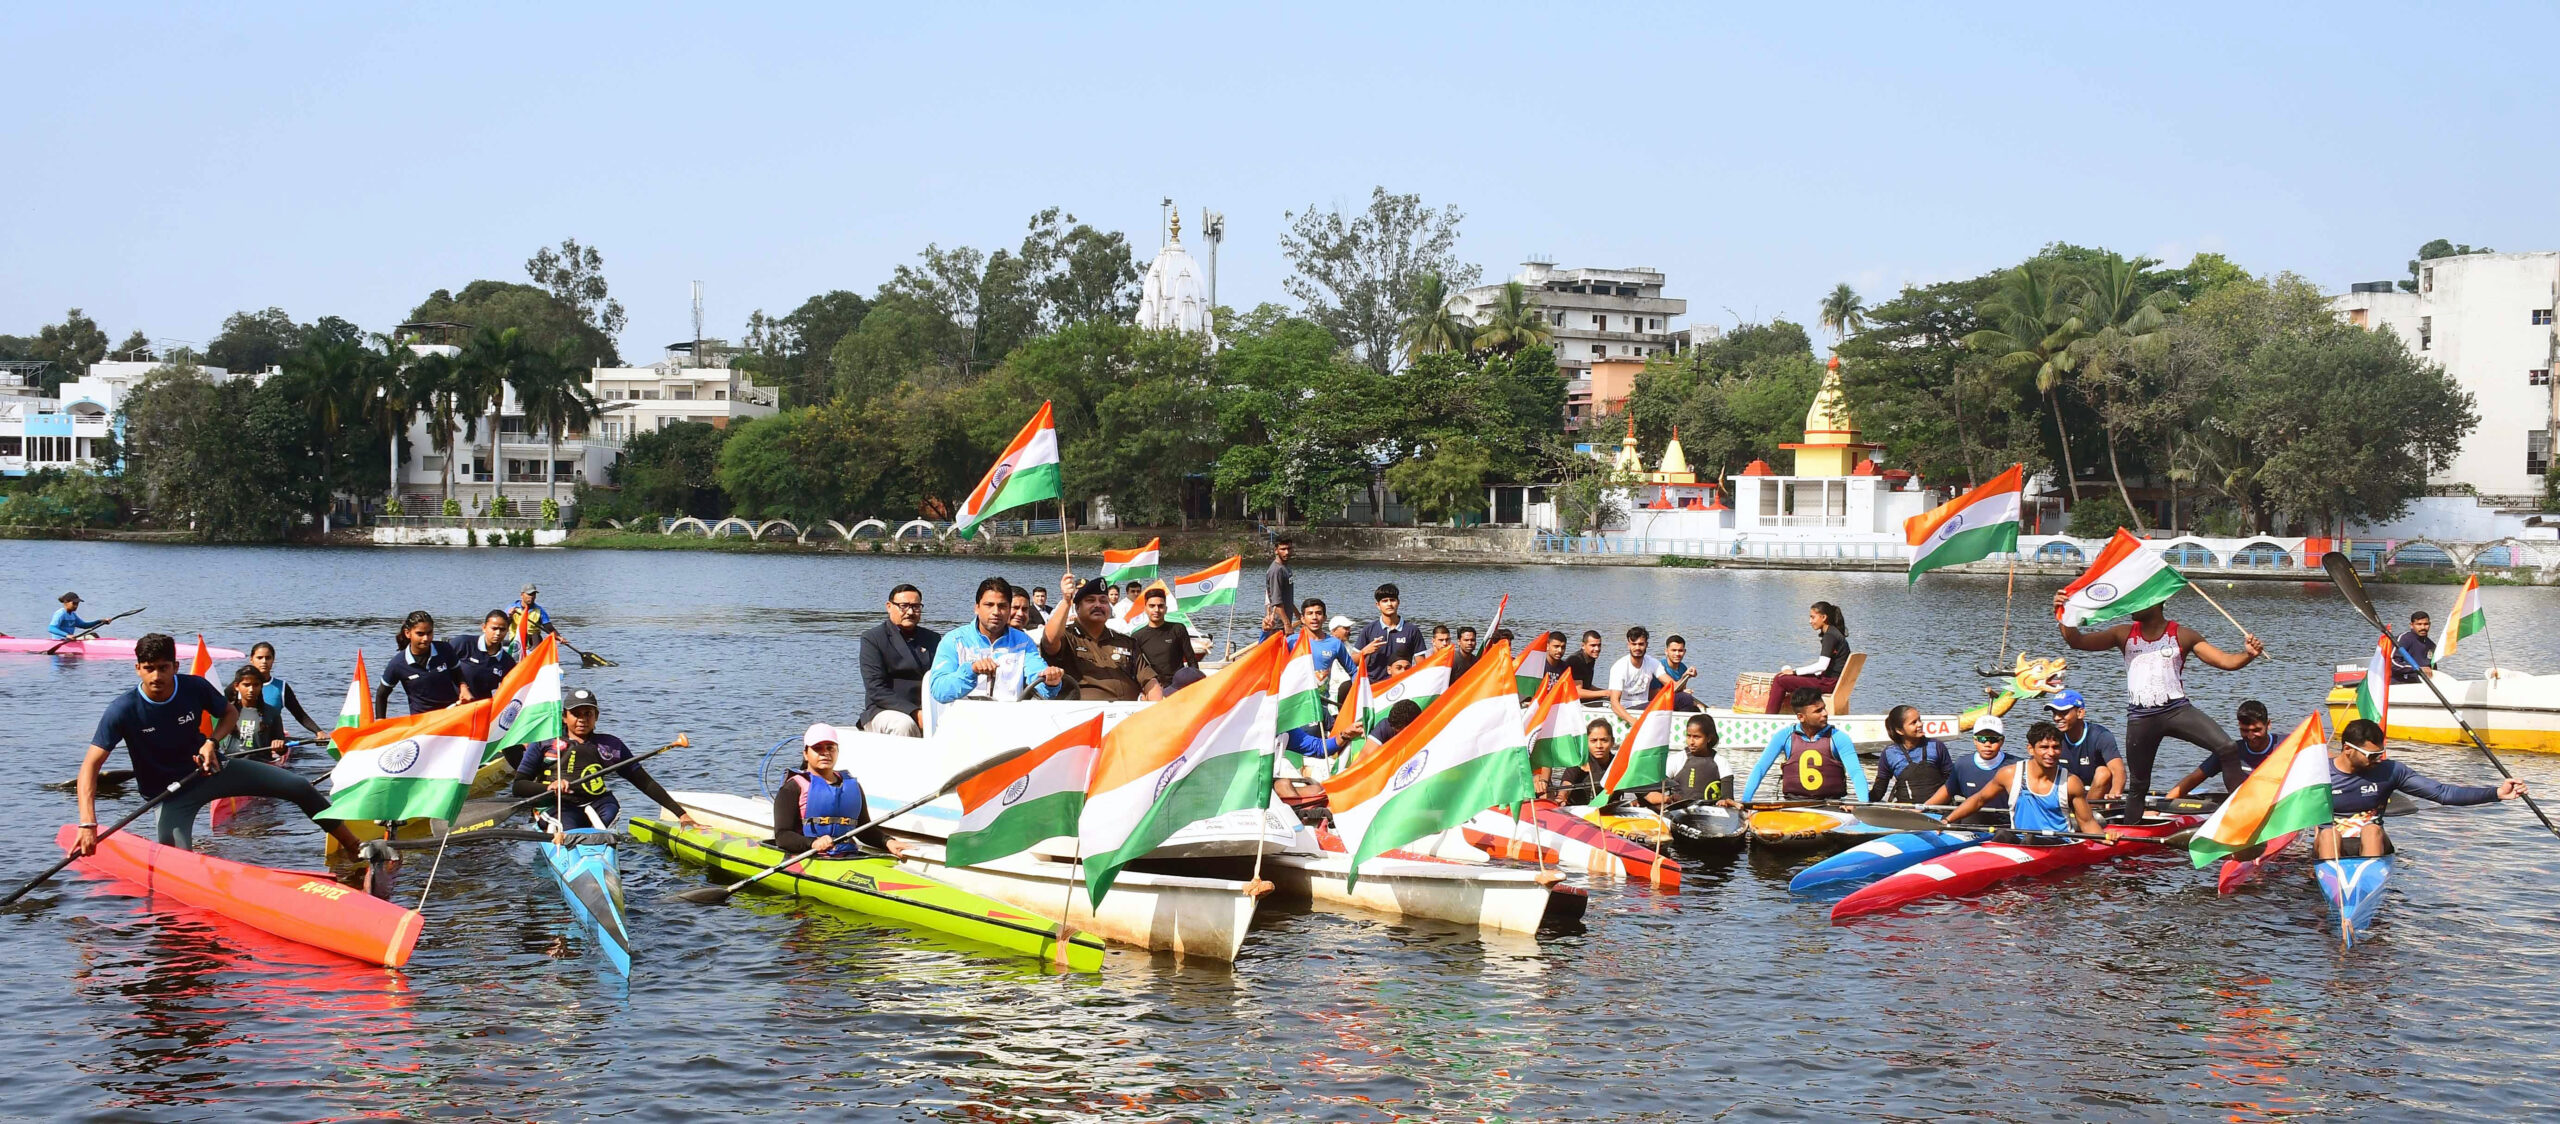 Participants take part in a boat rally ahead of the Khelo India Para Games 2023